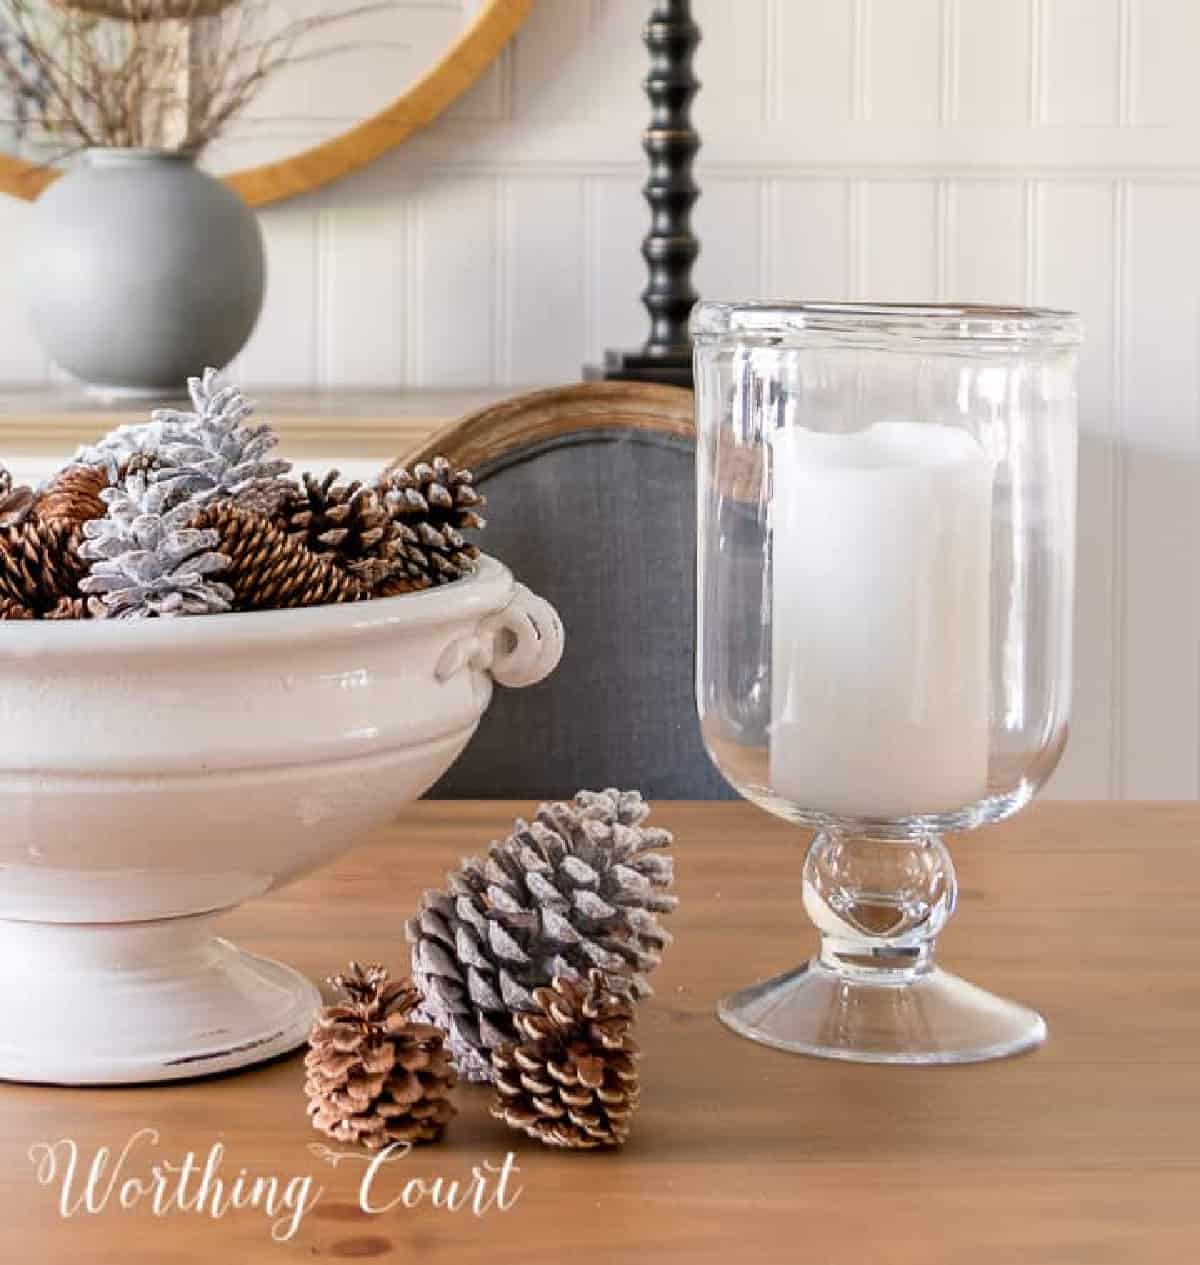 large white pedestal bowl on a dining table decorated for winter with pinecones and flanked by glass hurricanes